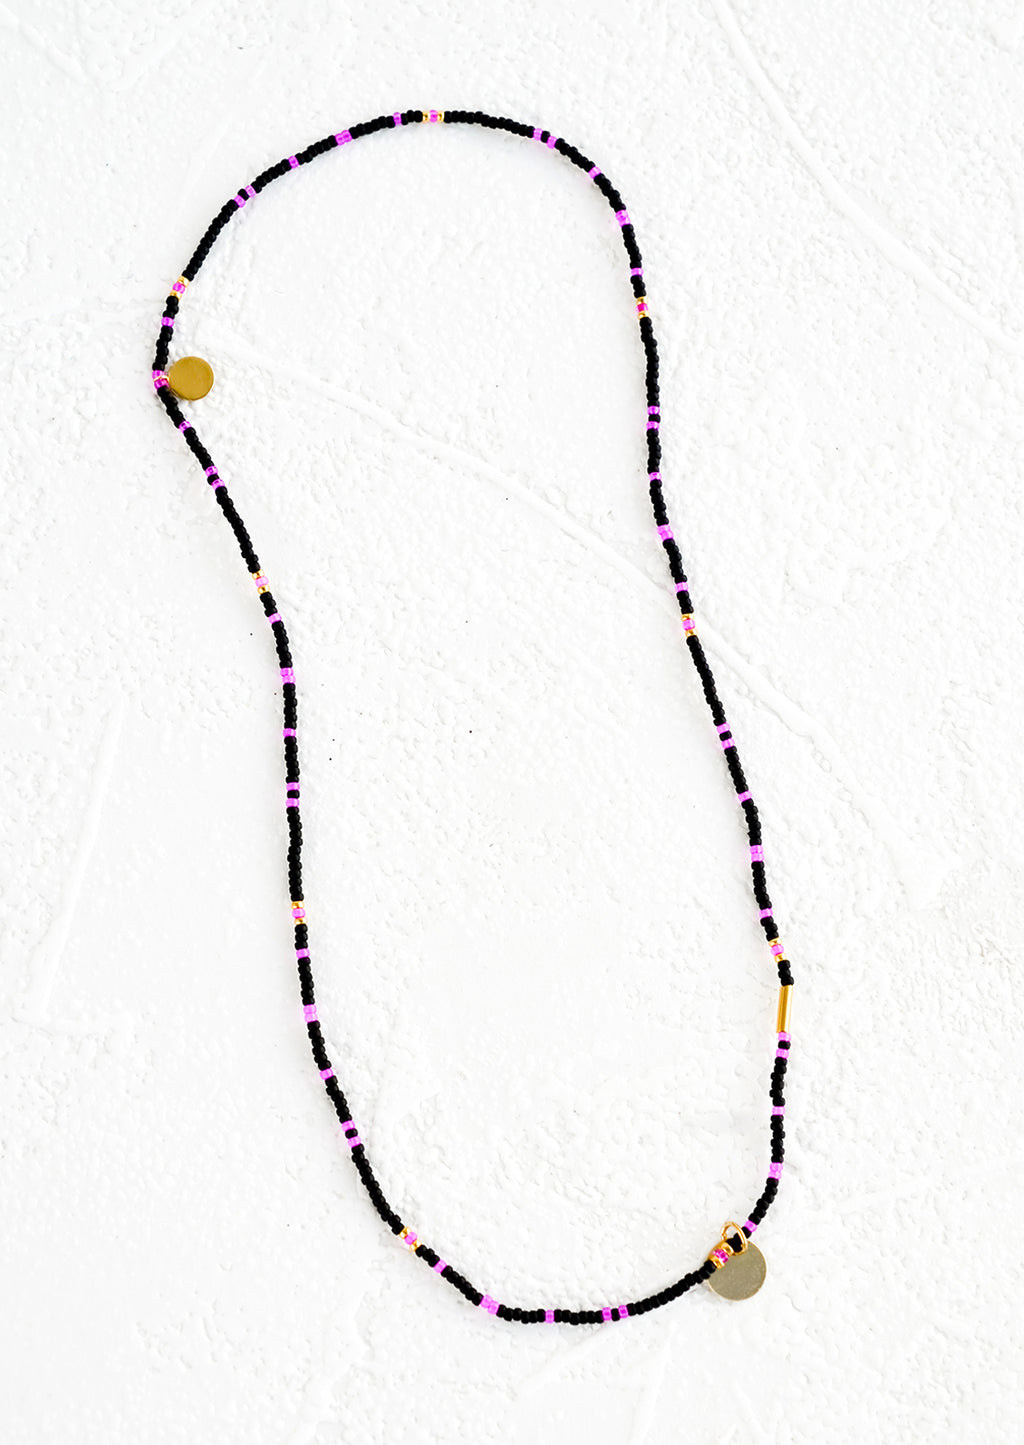 Black / Neon Pink: A seed bead choker necklace in black and neon pink beads.